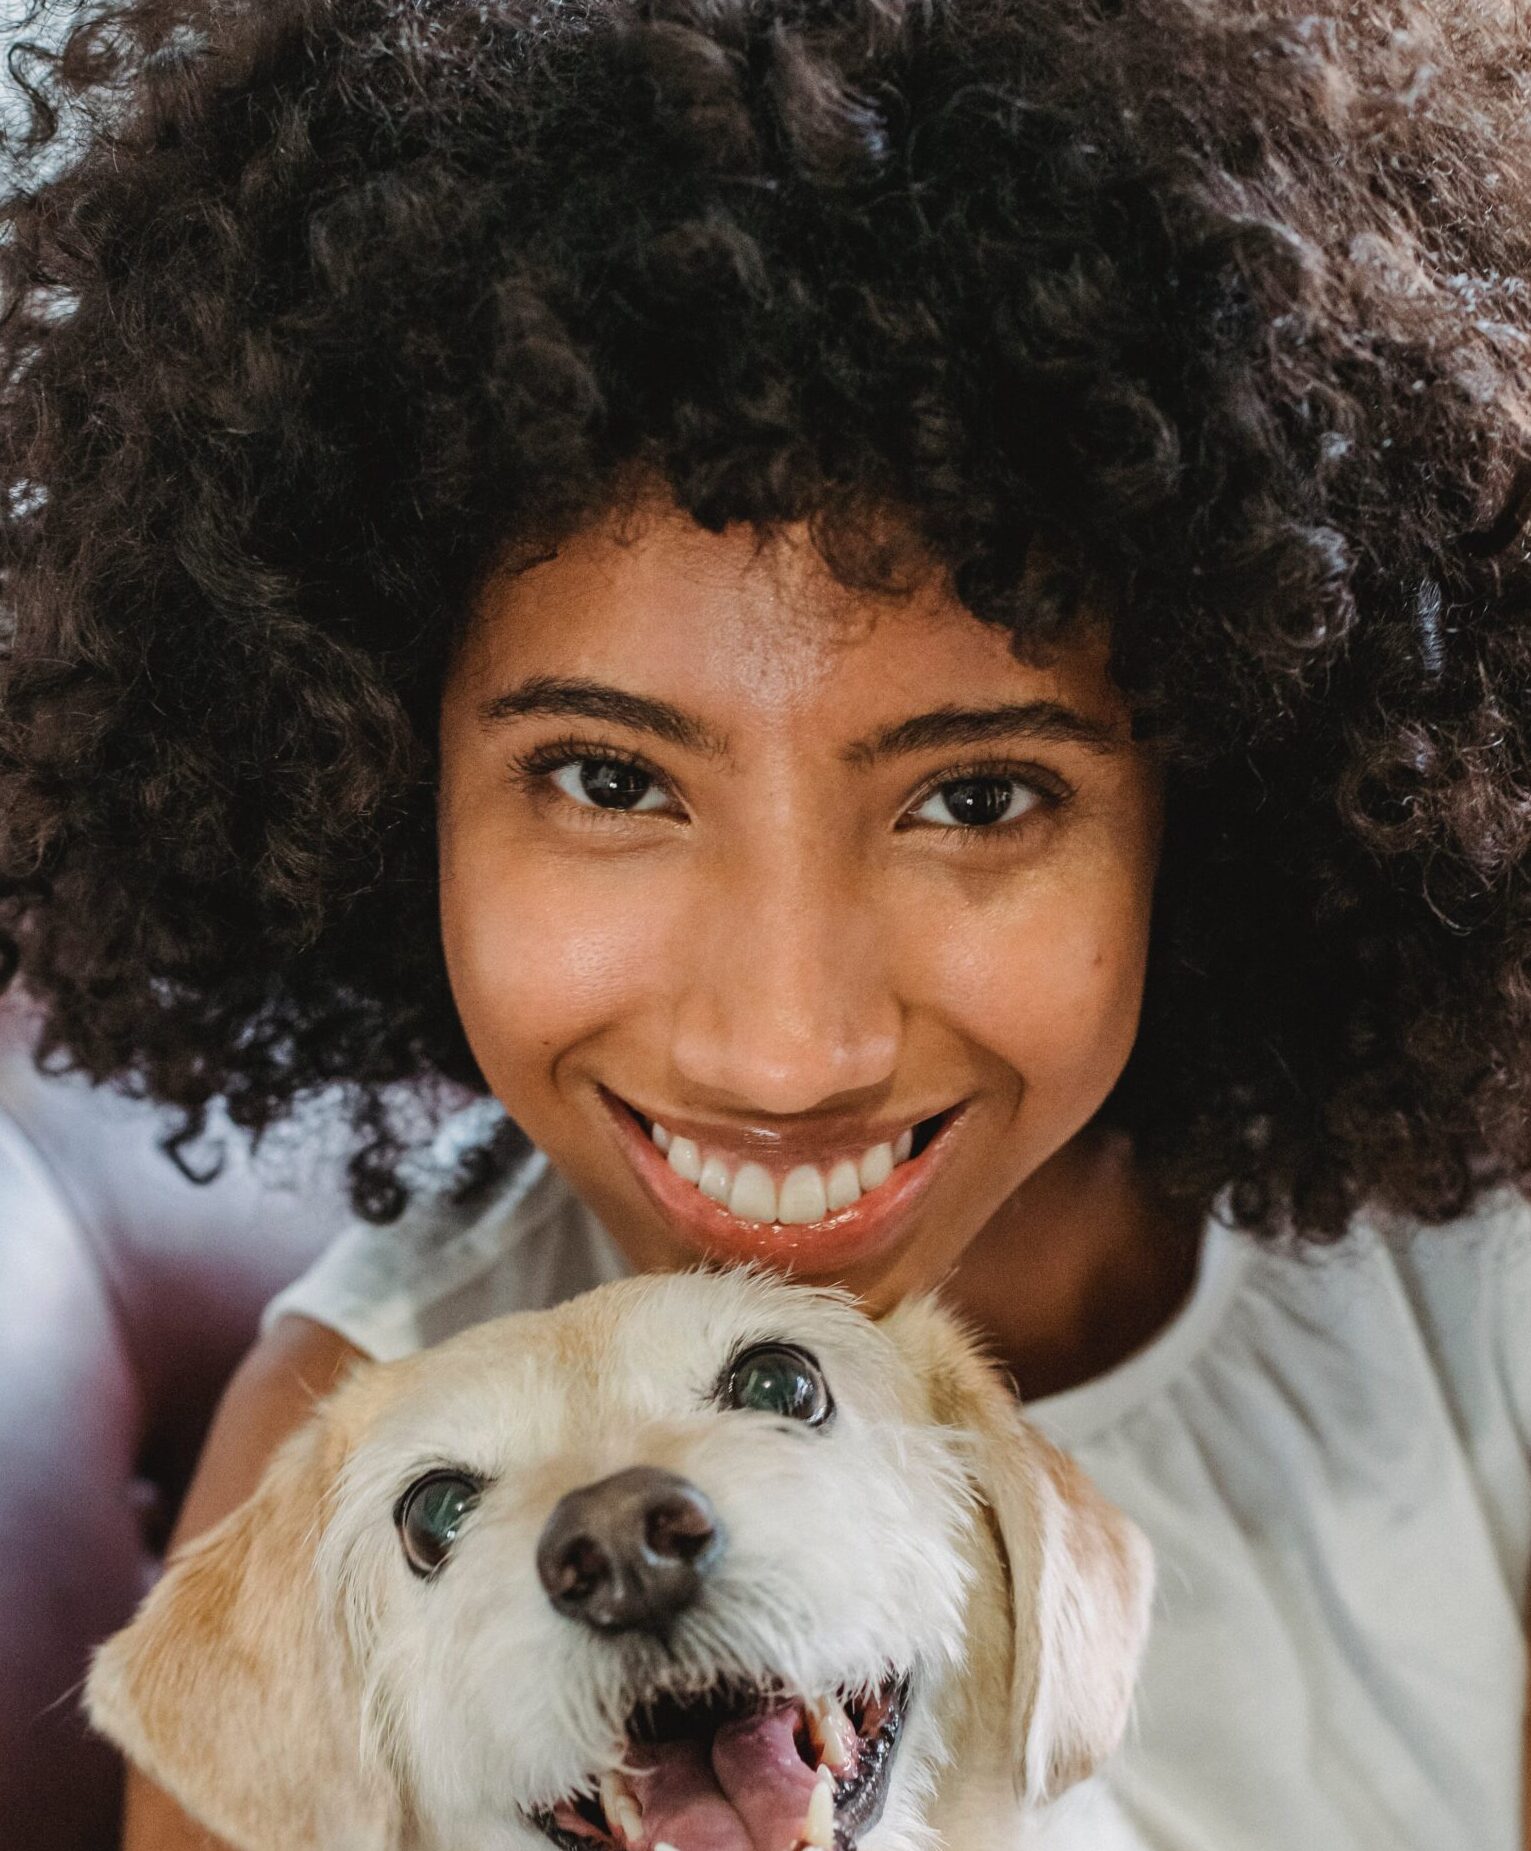 Person with curly hair holding a smiling dog with cream colored hair.